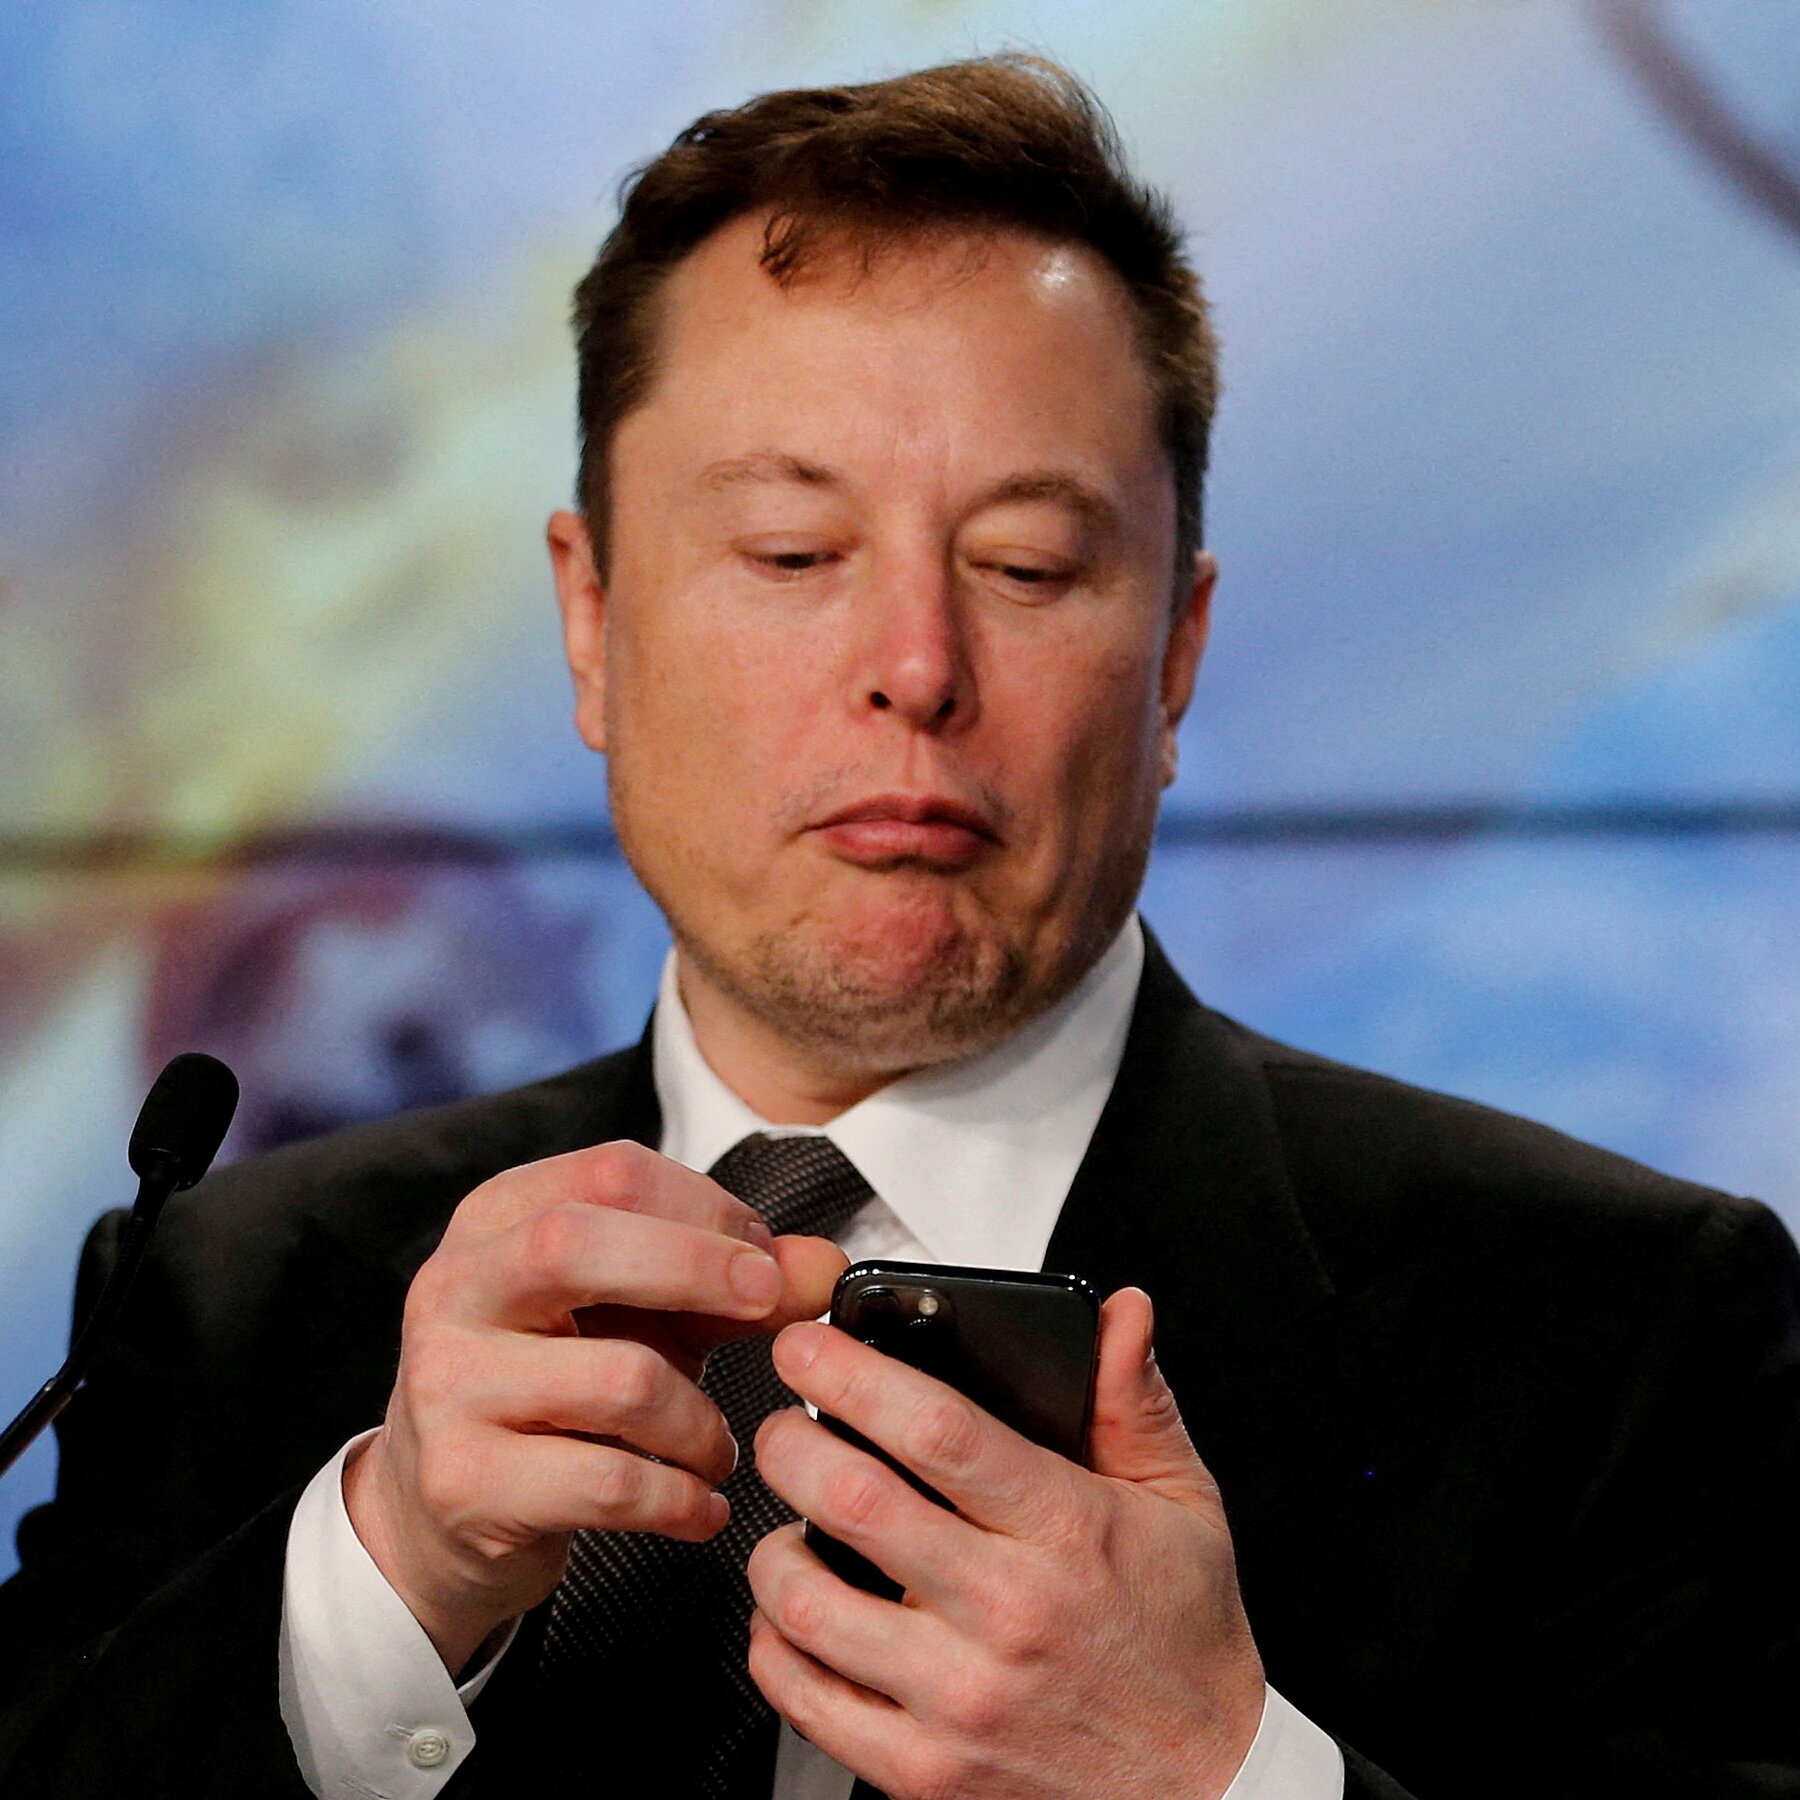 What plans does Elon Musk have for Twitter?